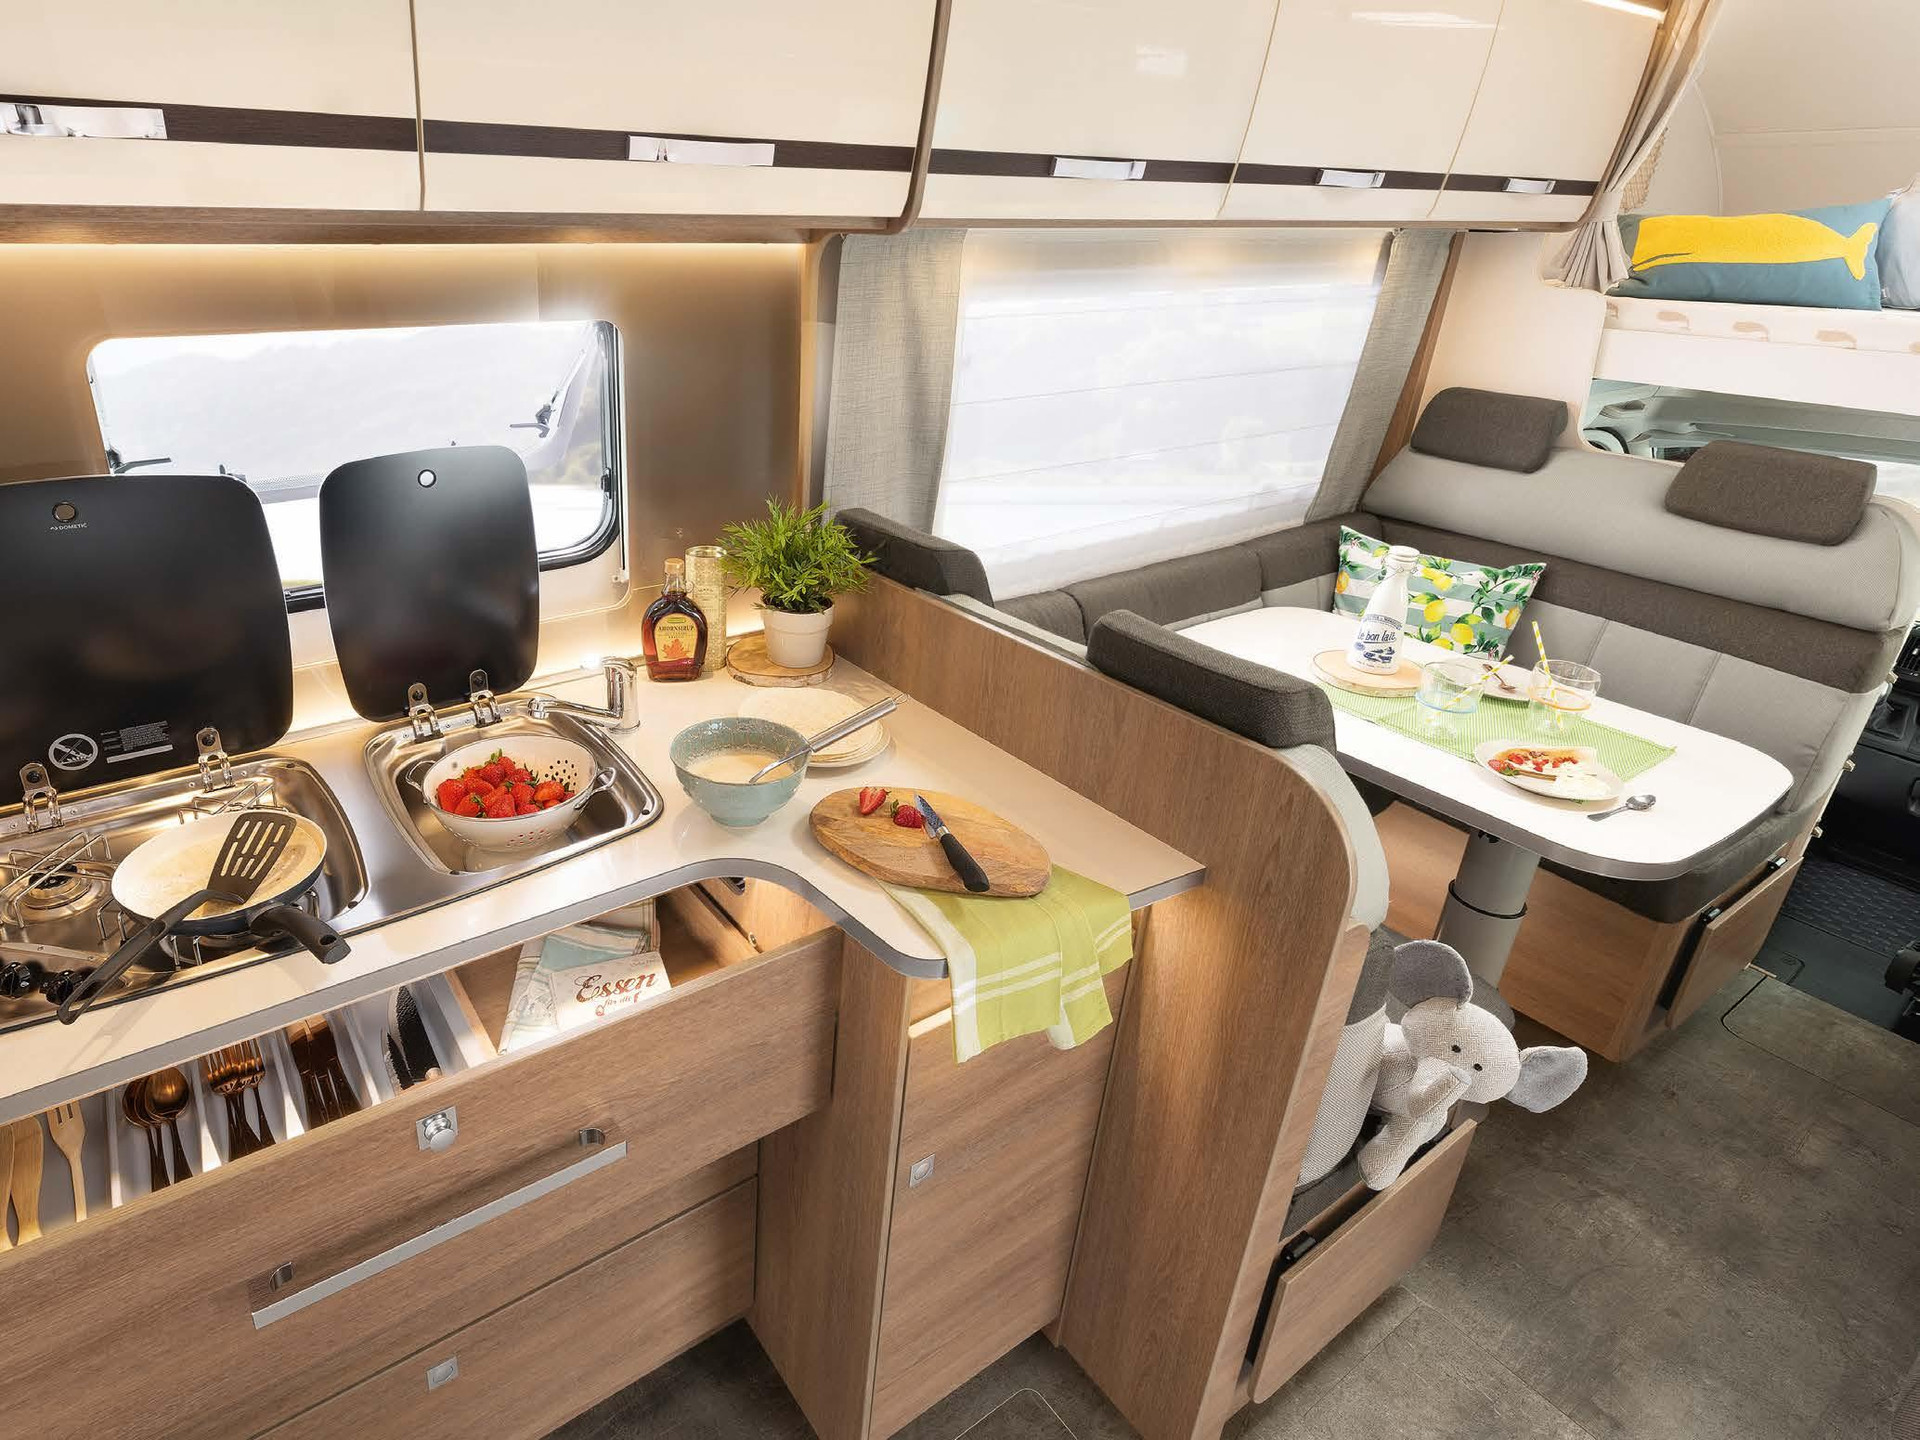 Fully equipped kitchen with lots of storage space and plenty of room to conjure up tasty meals • A 7877-2 | La Rocca